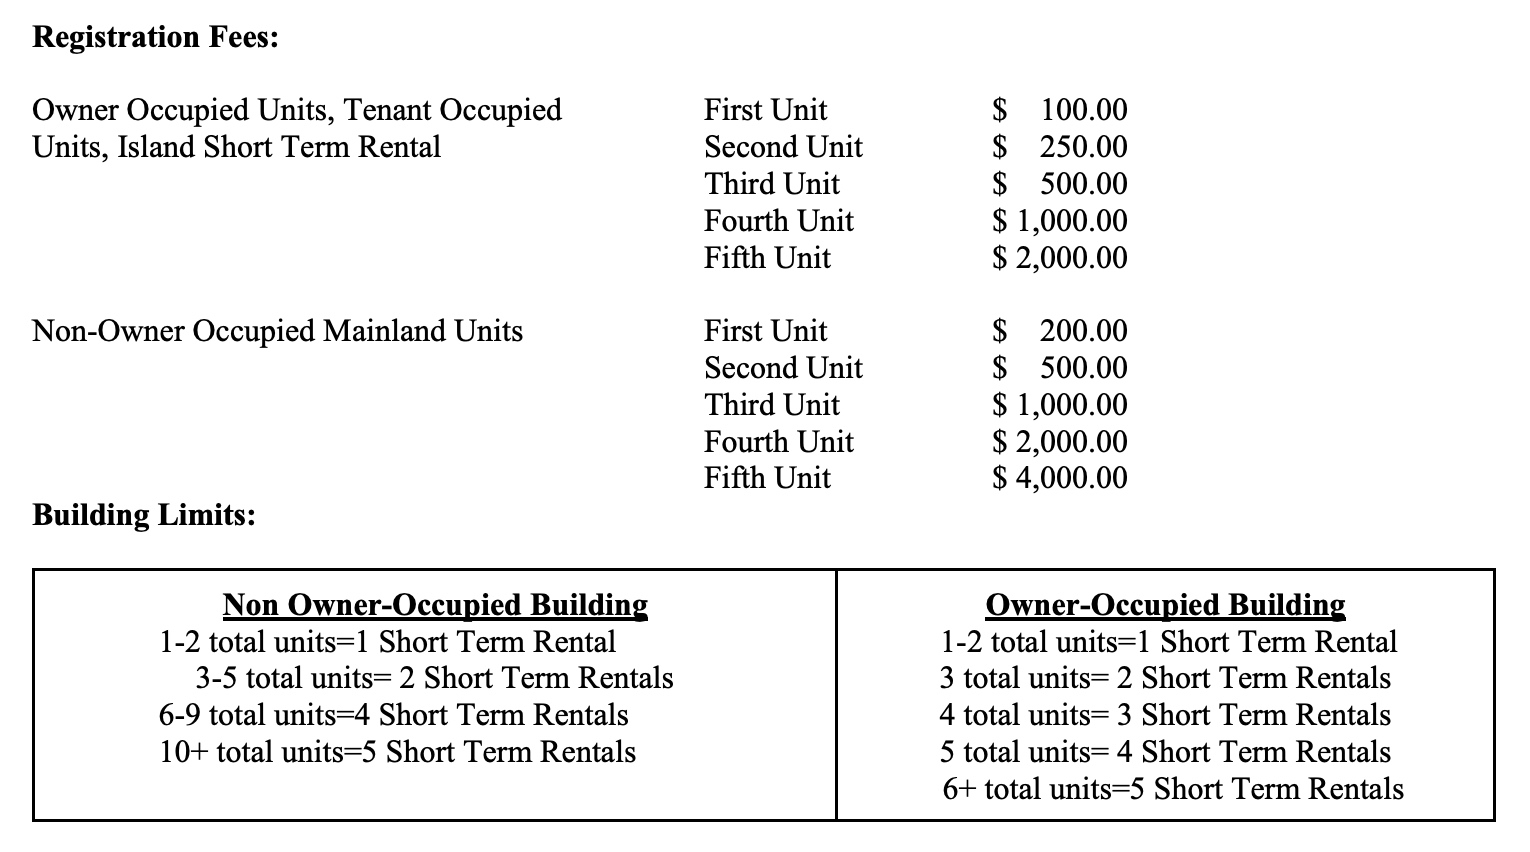 Registration fees and building limits for short-term rentals in Portland, Maine.